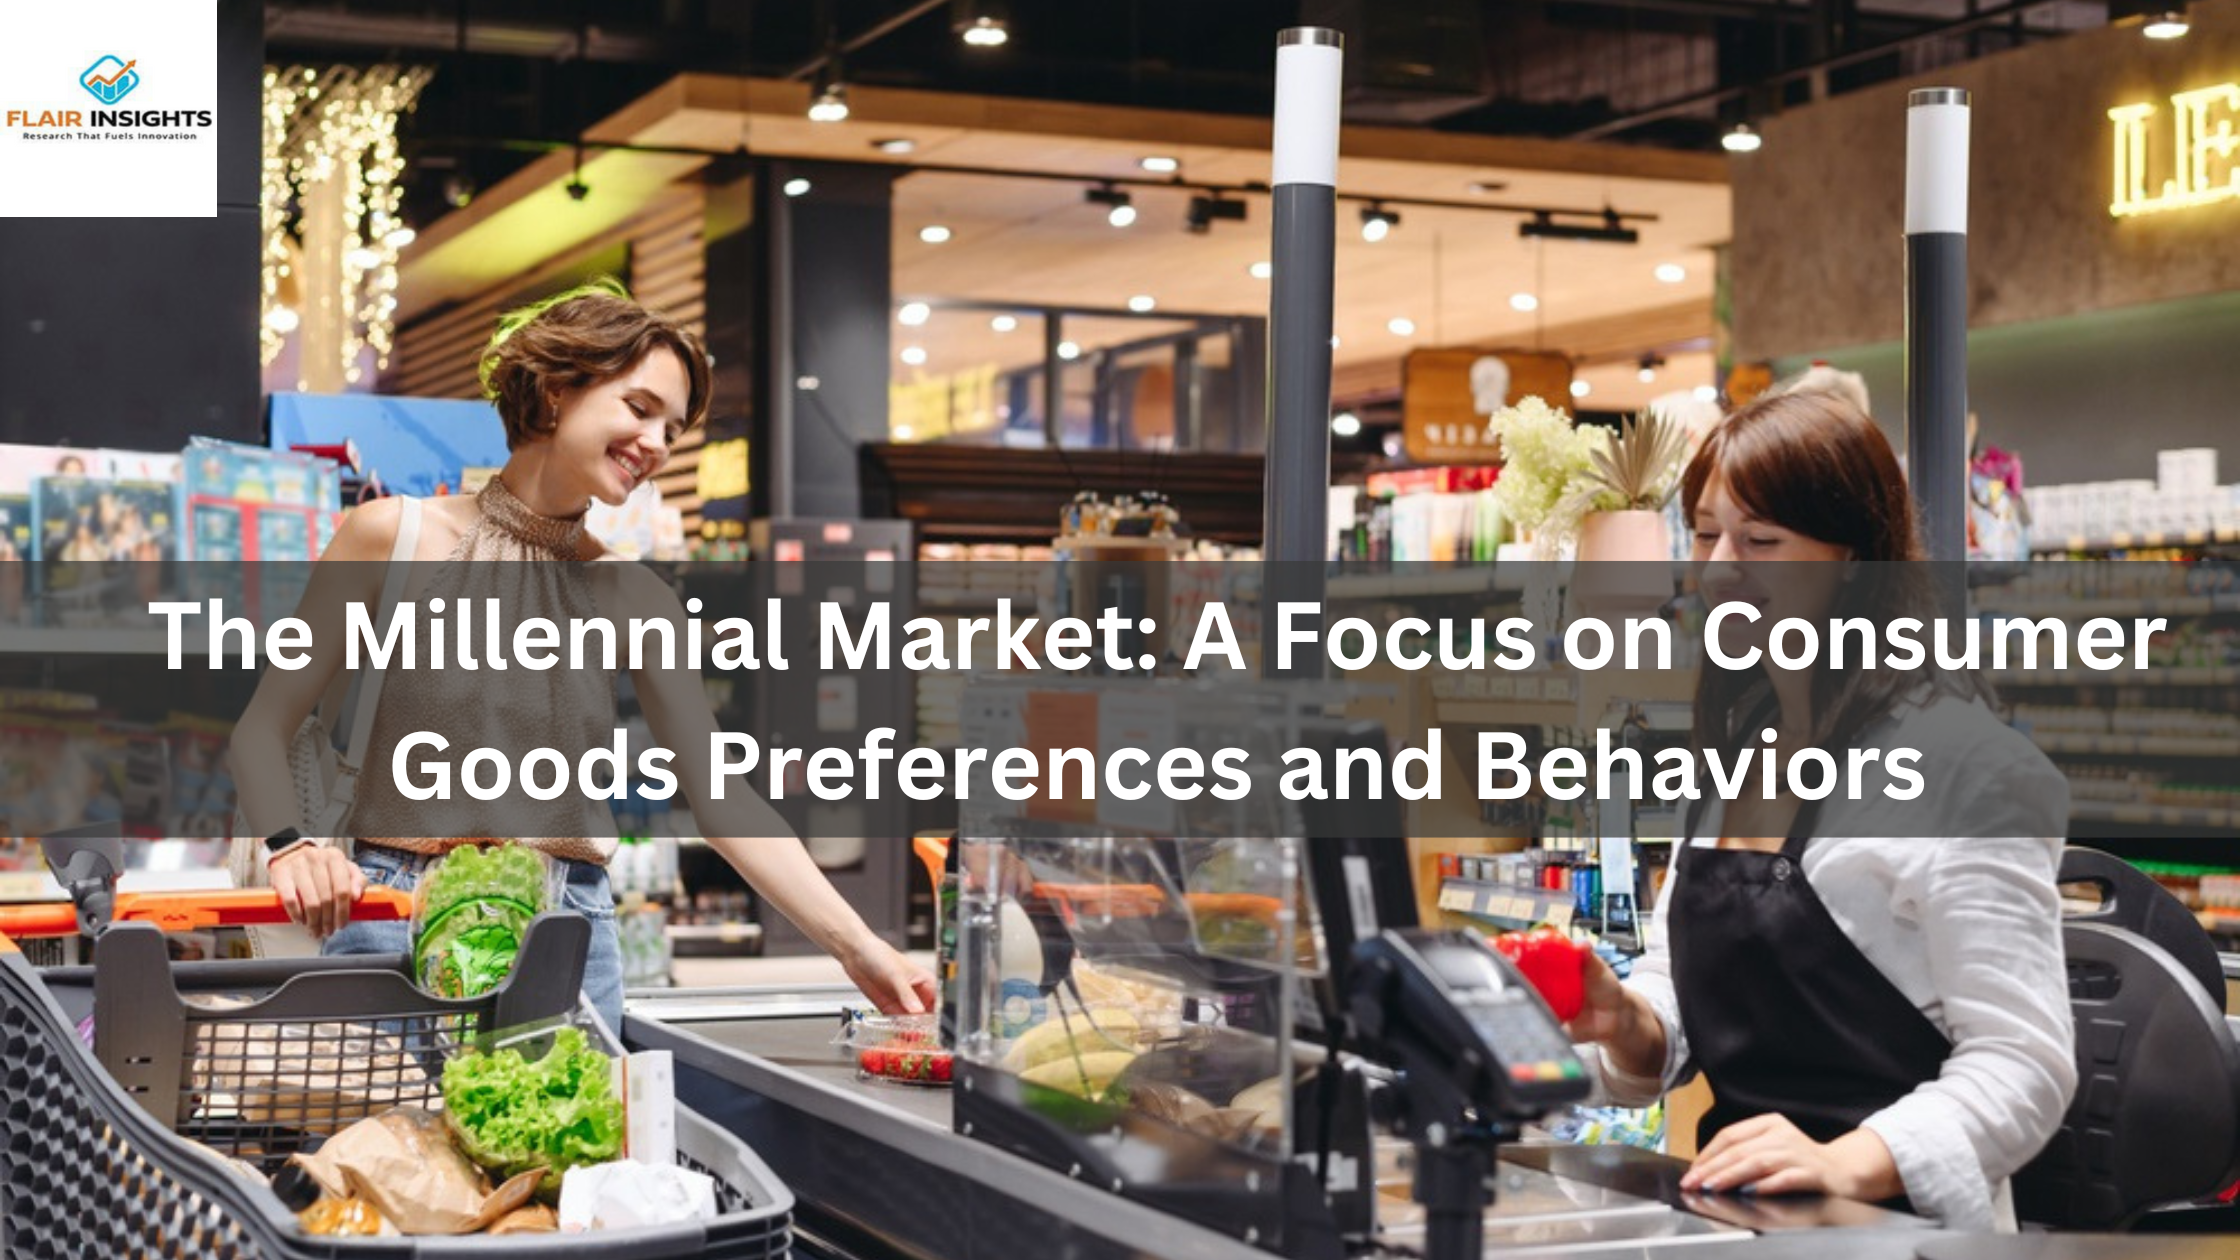 The Millennial Market: A Focus on Consumer Goods Preferences and Behaviors